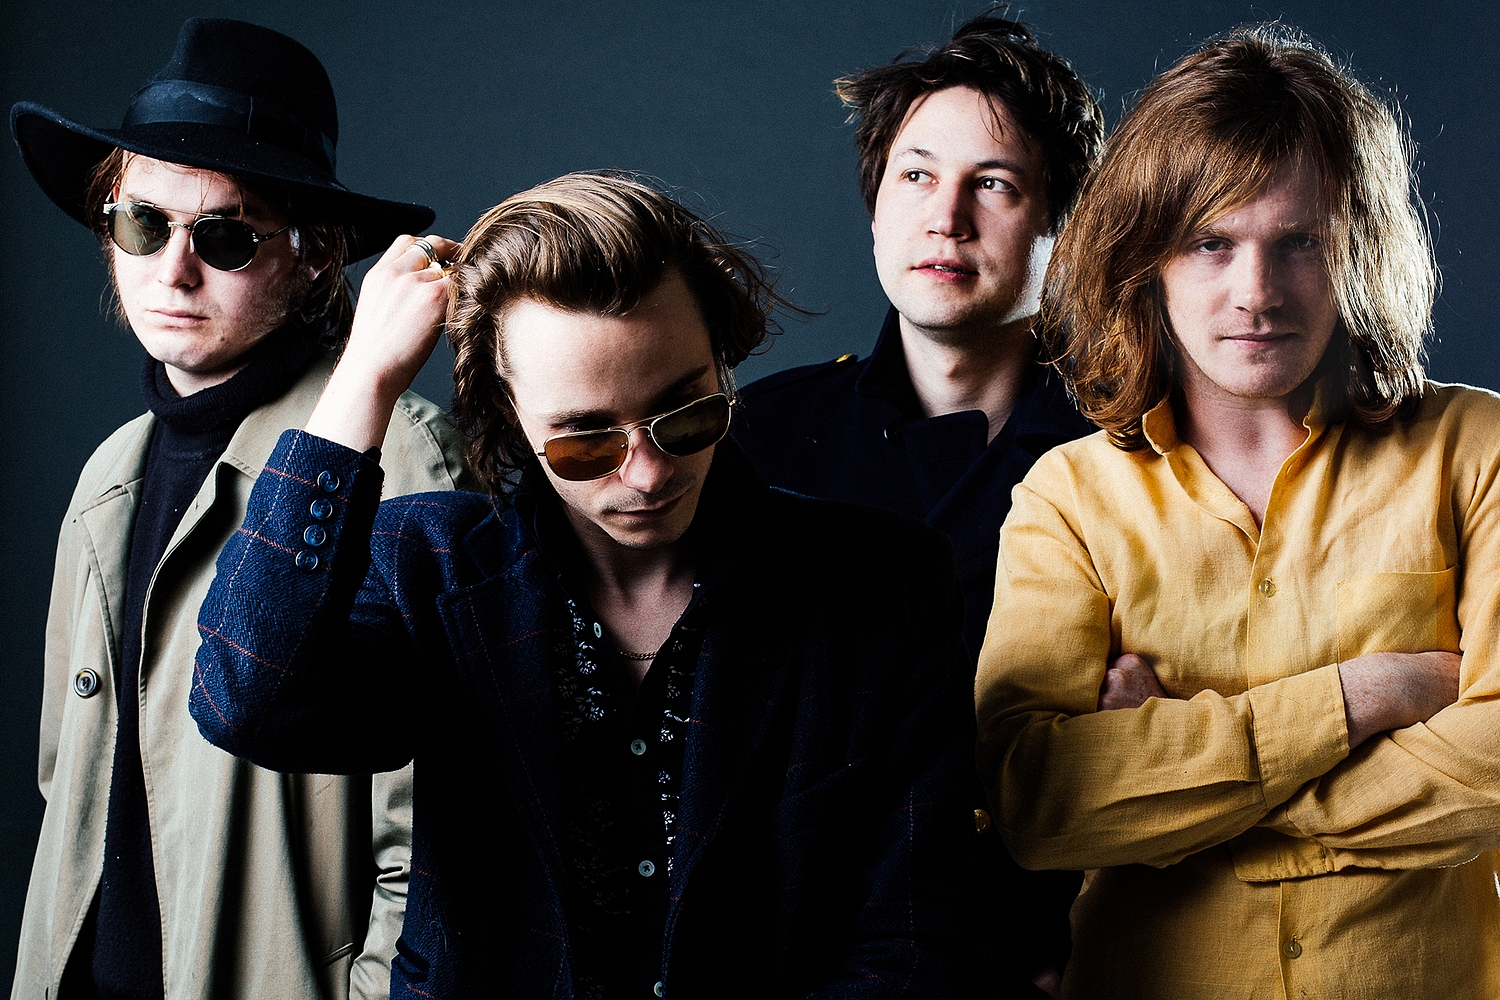 Palma Violets: “There’s no producer in the world who could ever make us sound professional”